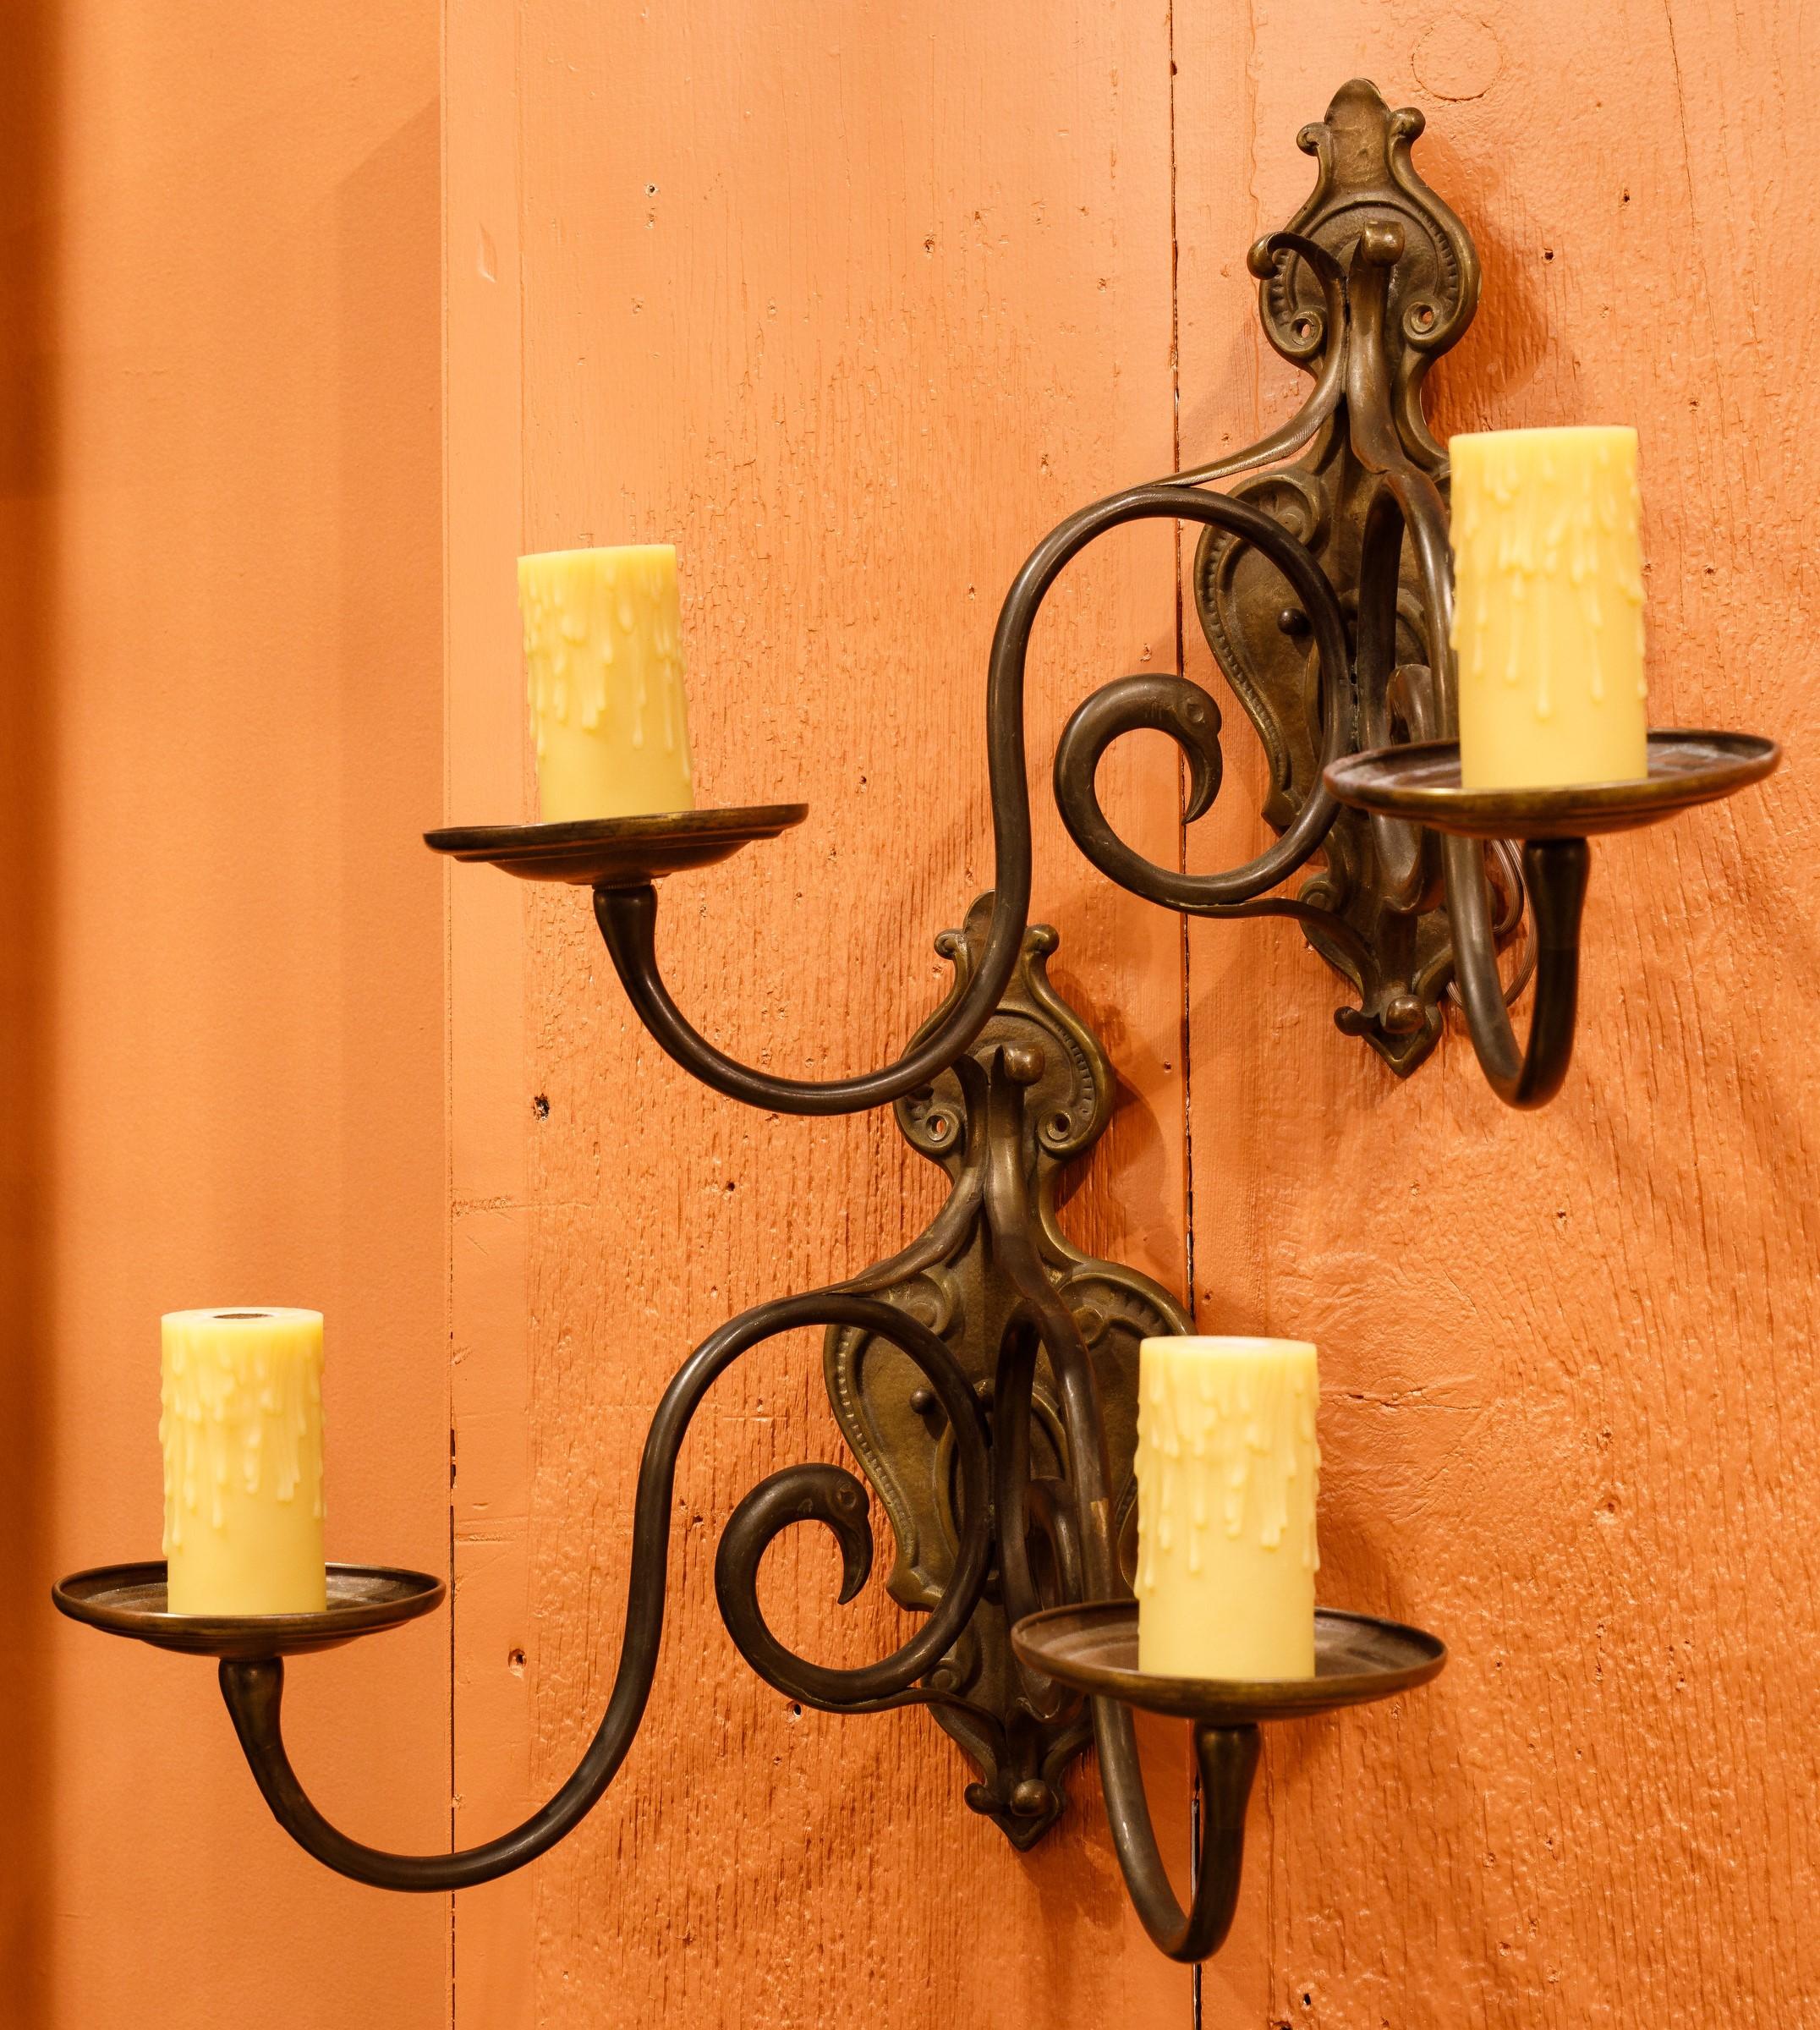 This pair of sconces is a beautiful classic and timeless pair of sconces.  They were purchased in Belgium but could be Belgian, French or Dutch.  The bronze sconces of have deep castings and unusual design.  They have hints of Arts and Crafts and